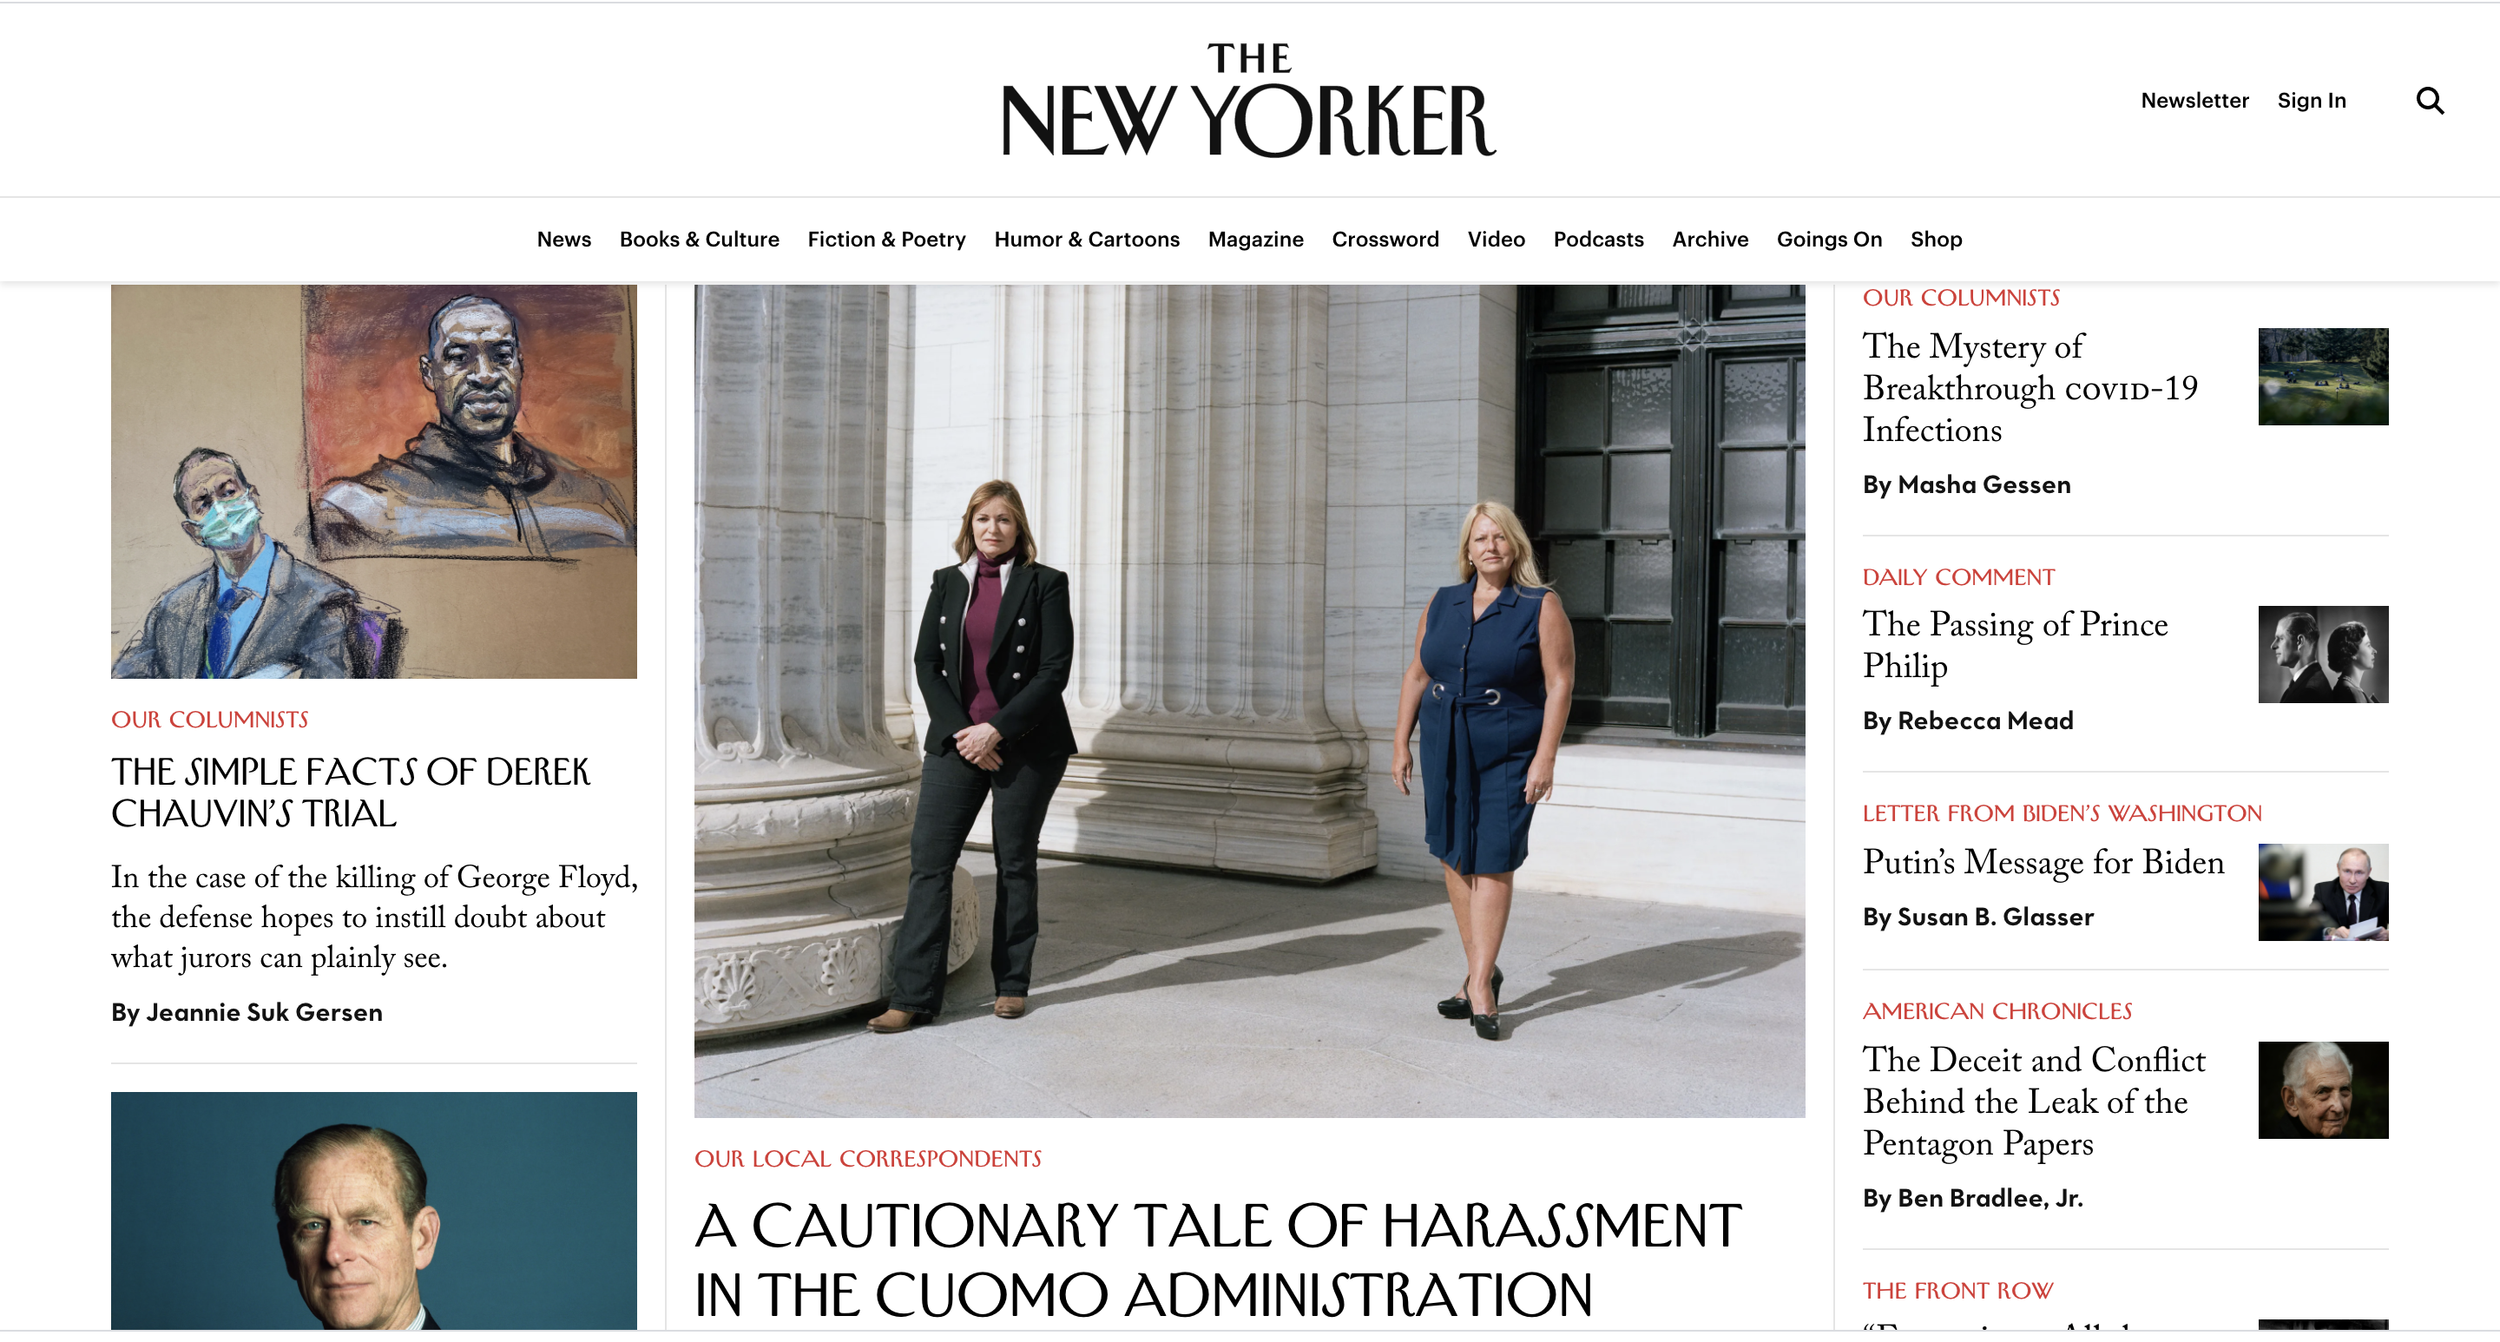  "A Cautionary Tale of Workplace Harassment in the Cuomo Administration,"  The New Yorker , April 2021 